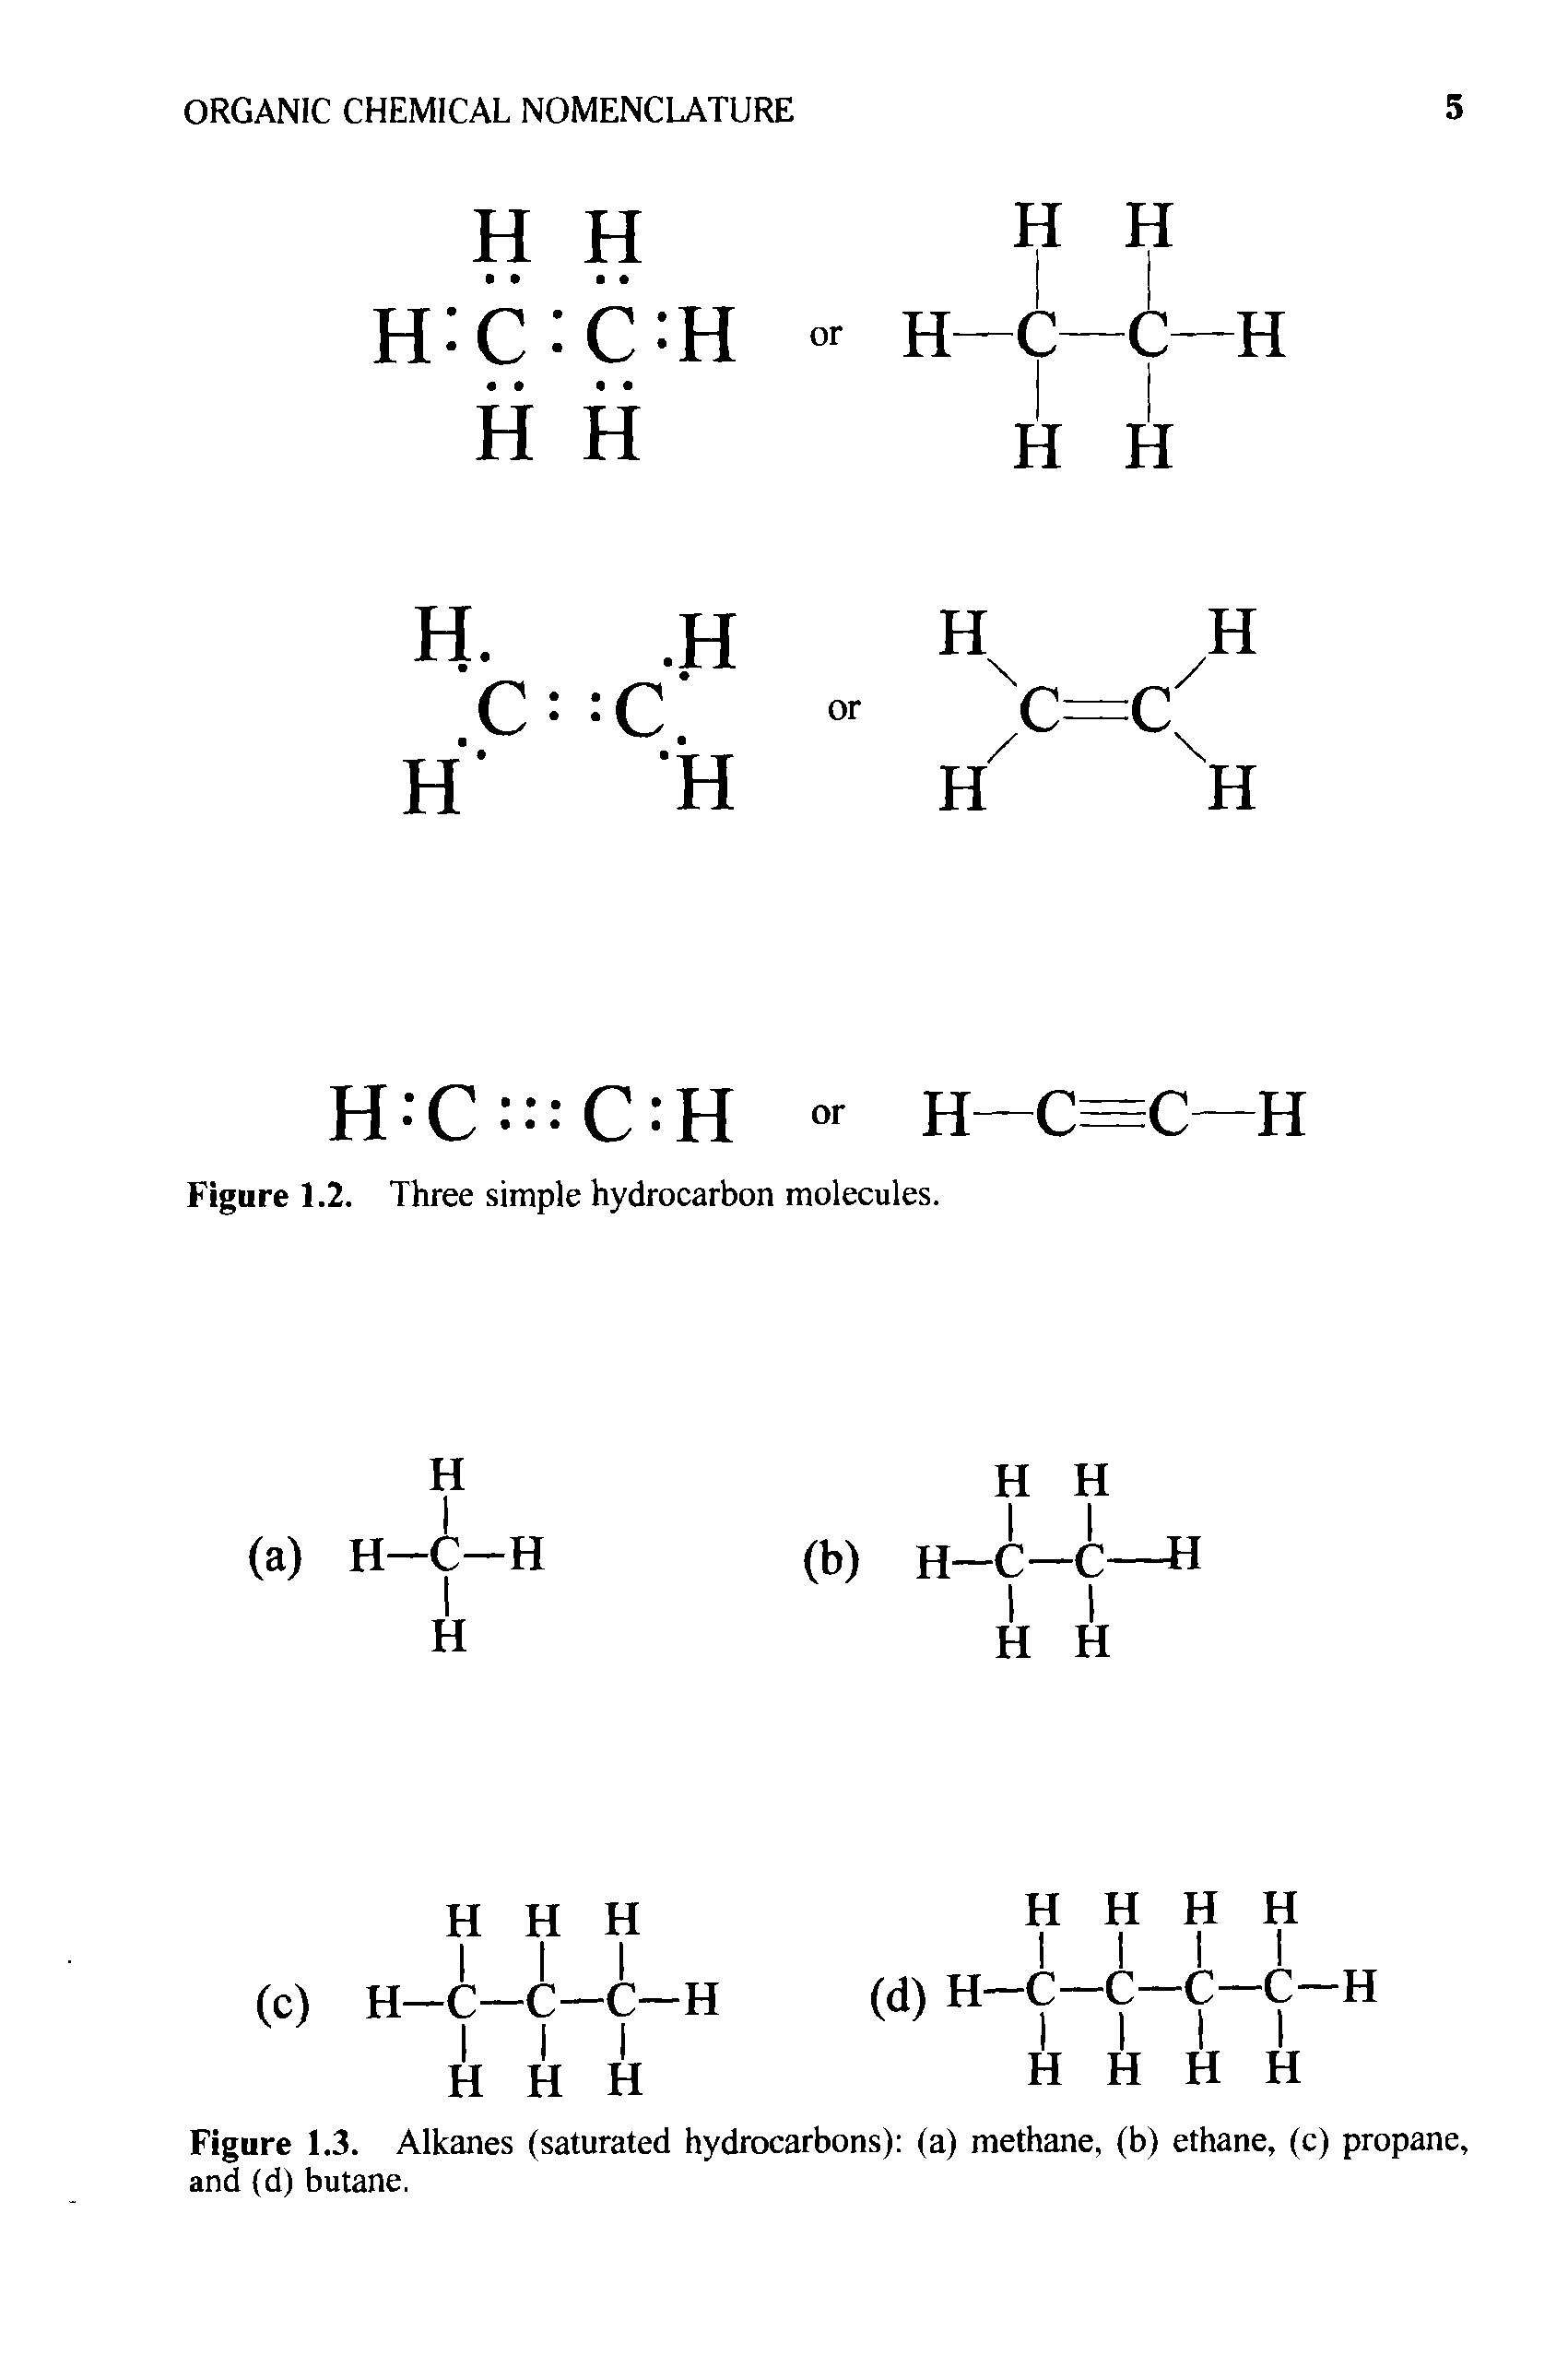 Figure 1.3. Alkanes (saturated hydrocarbons) (a) methane, (b) ethane, (c) propane, and (d) butane.